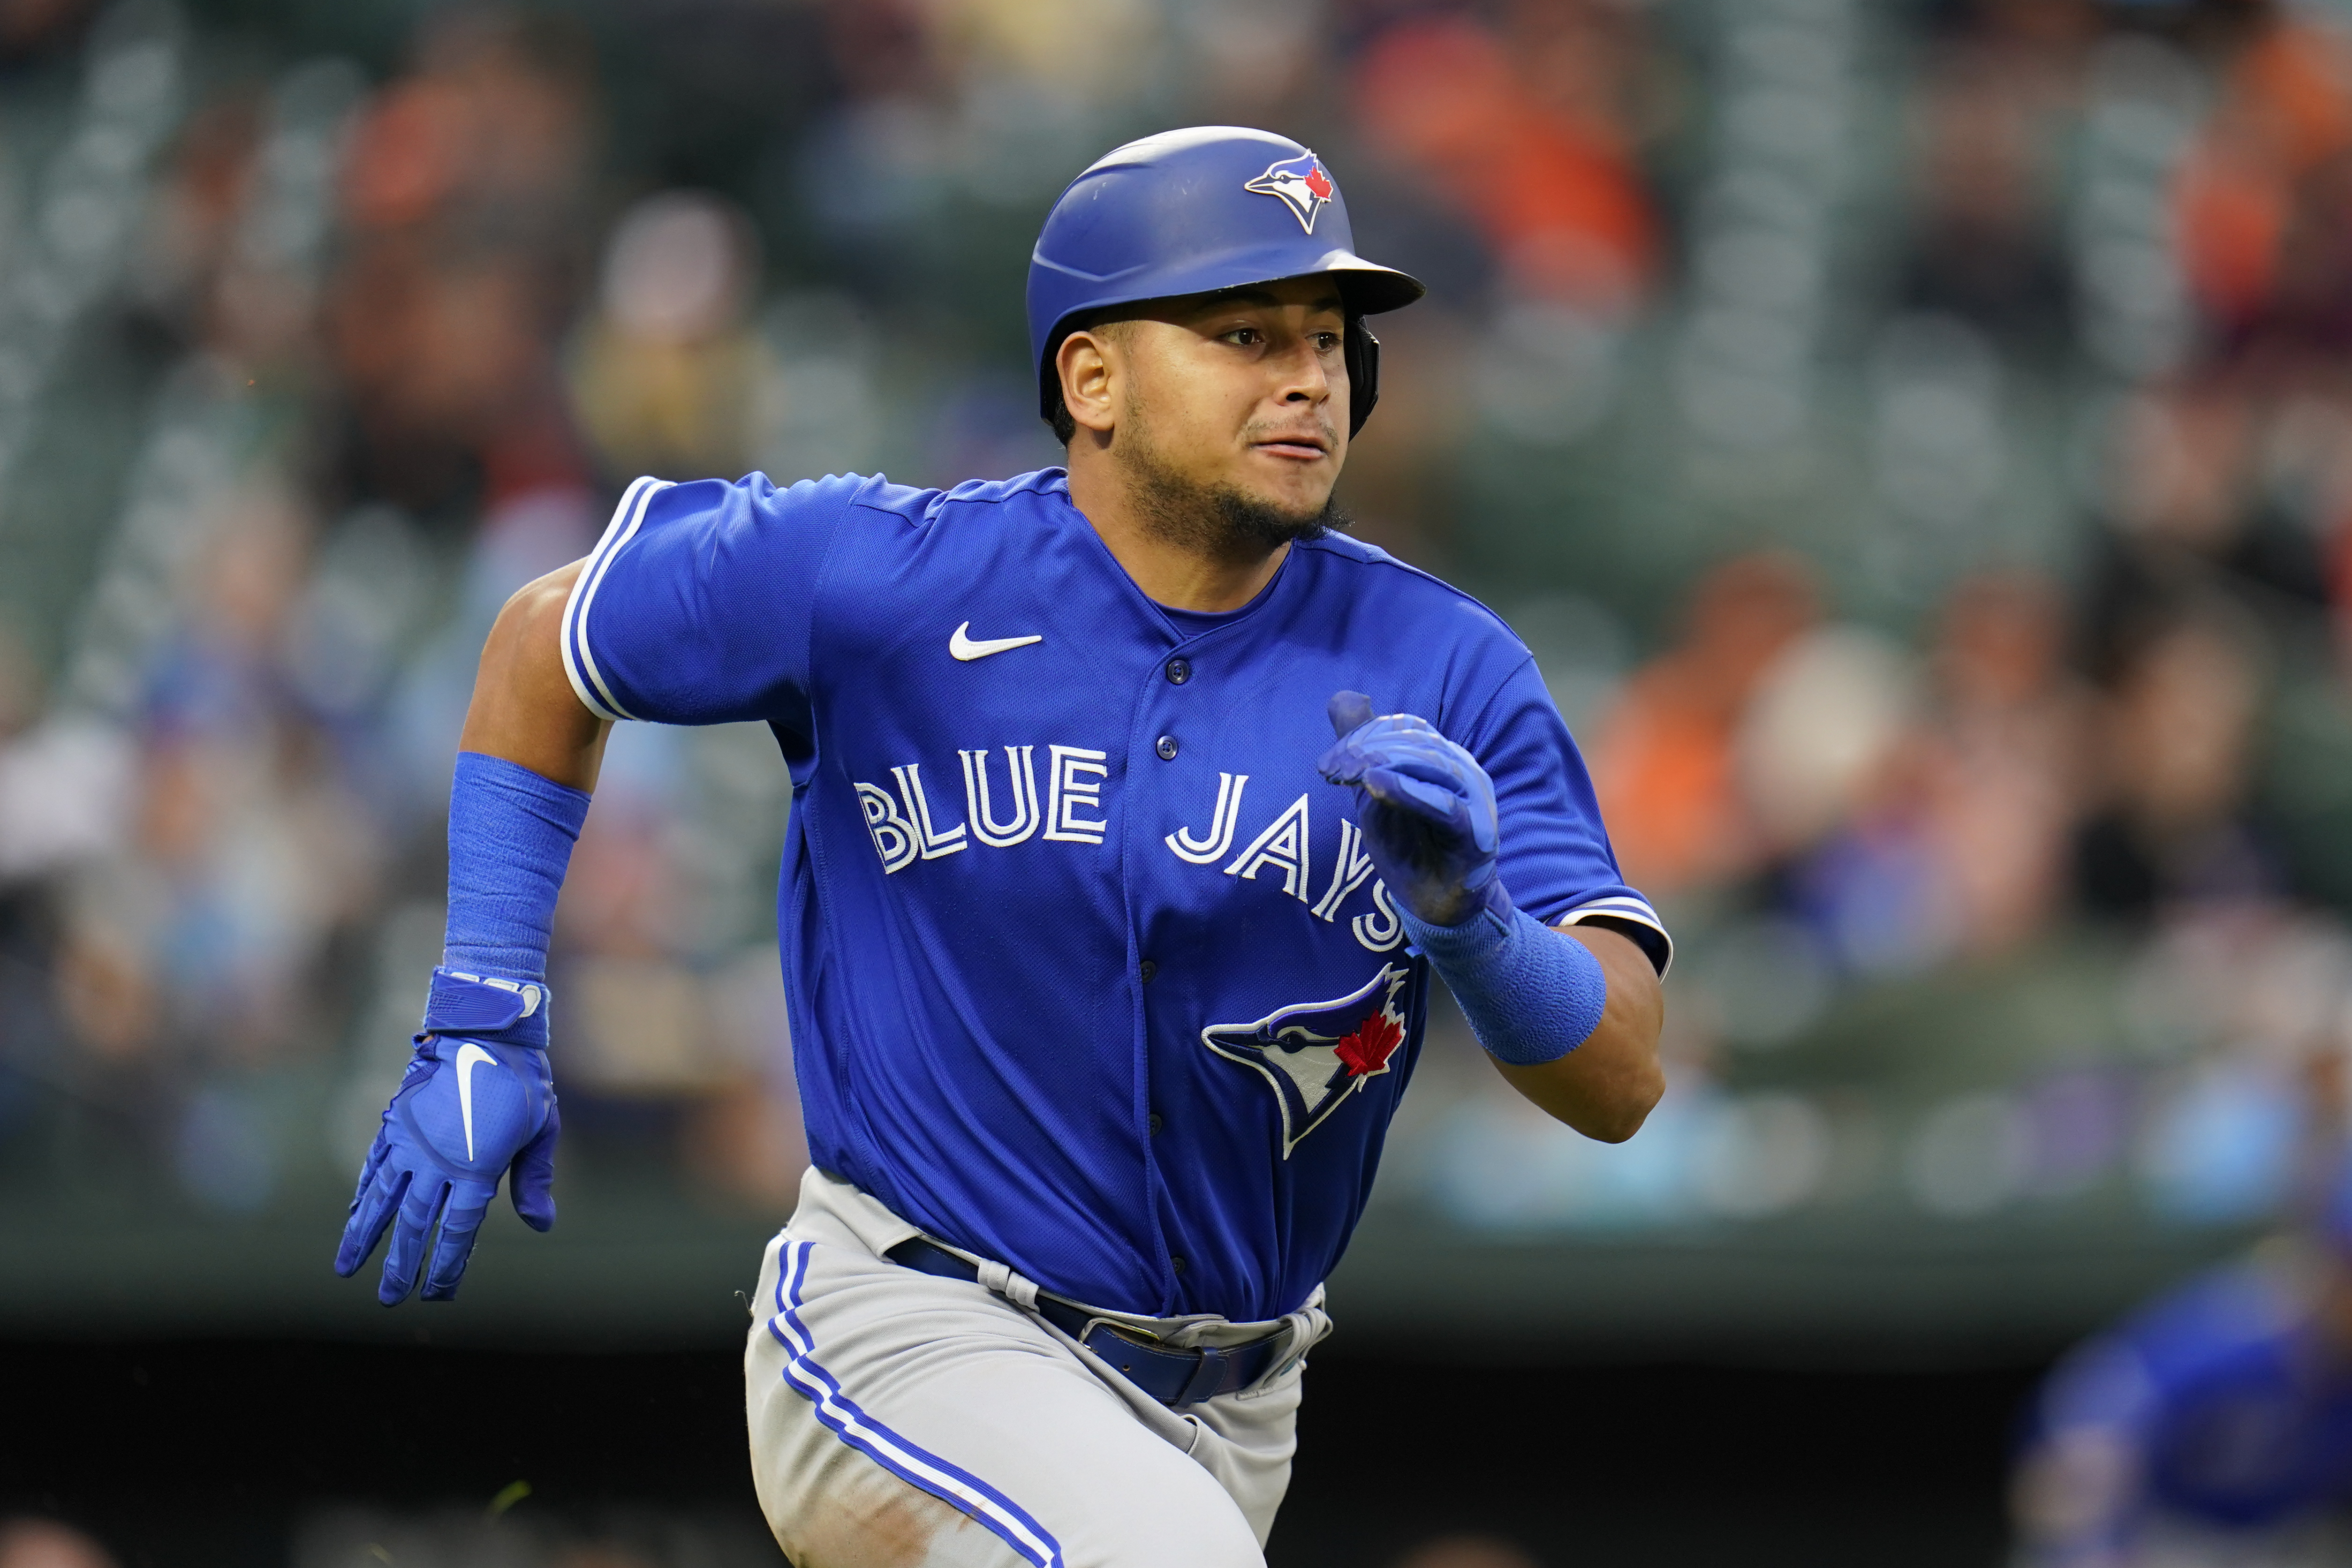 Blue Jays complete their outfield overhaul with Varsho trade